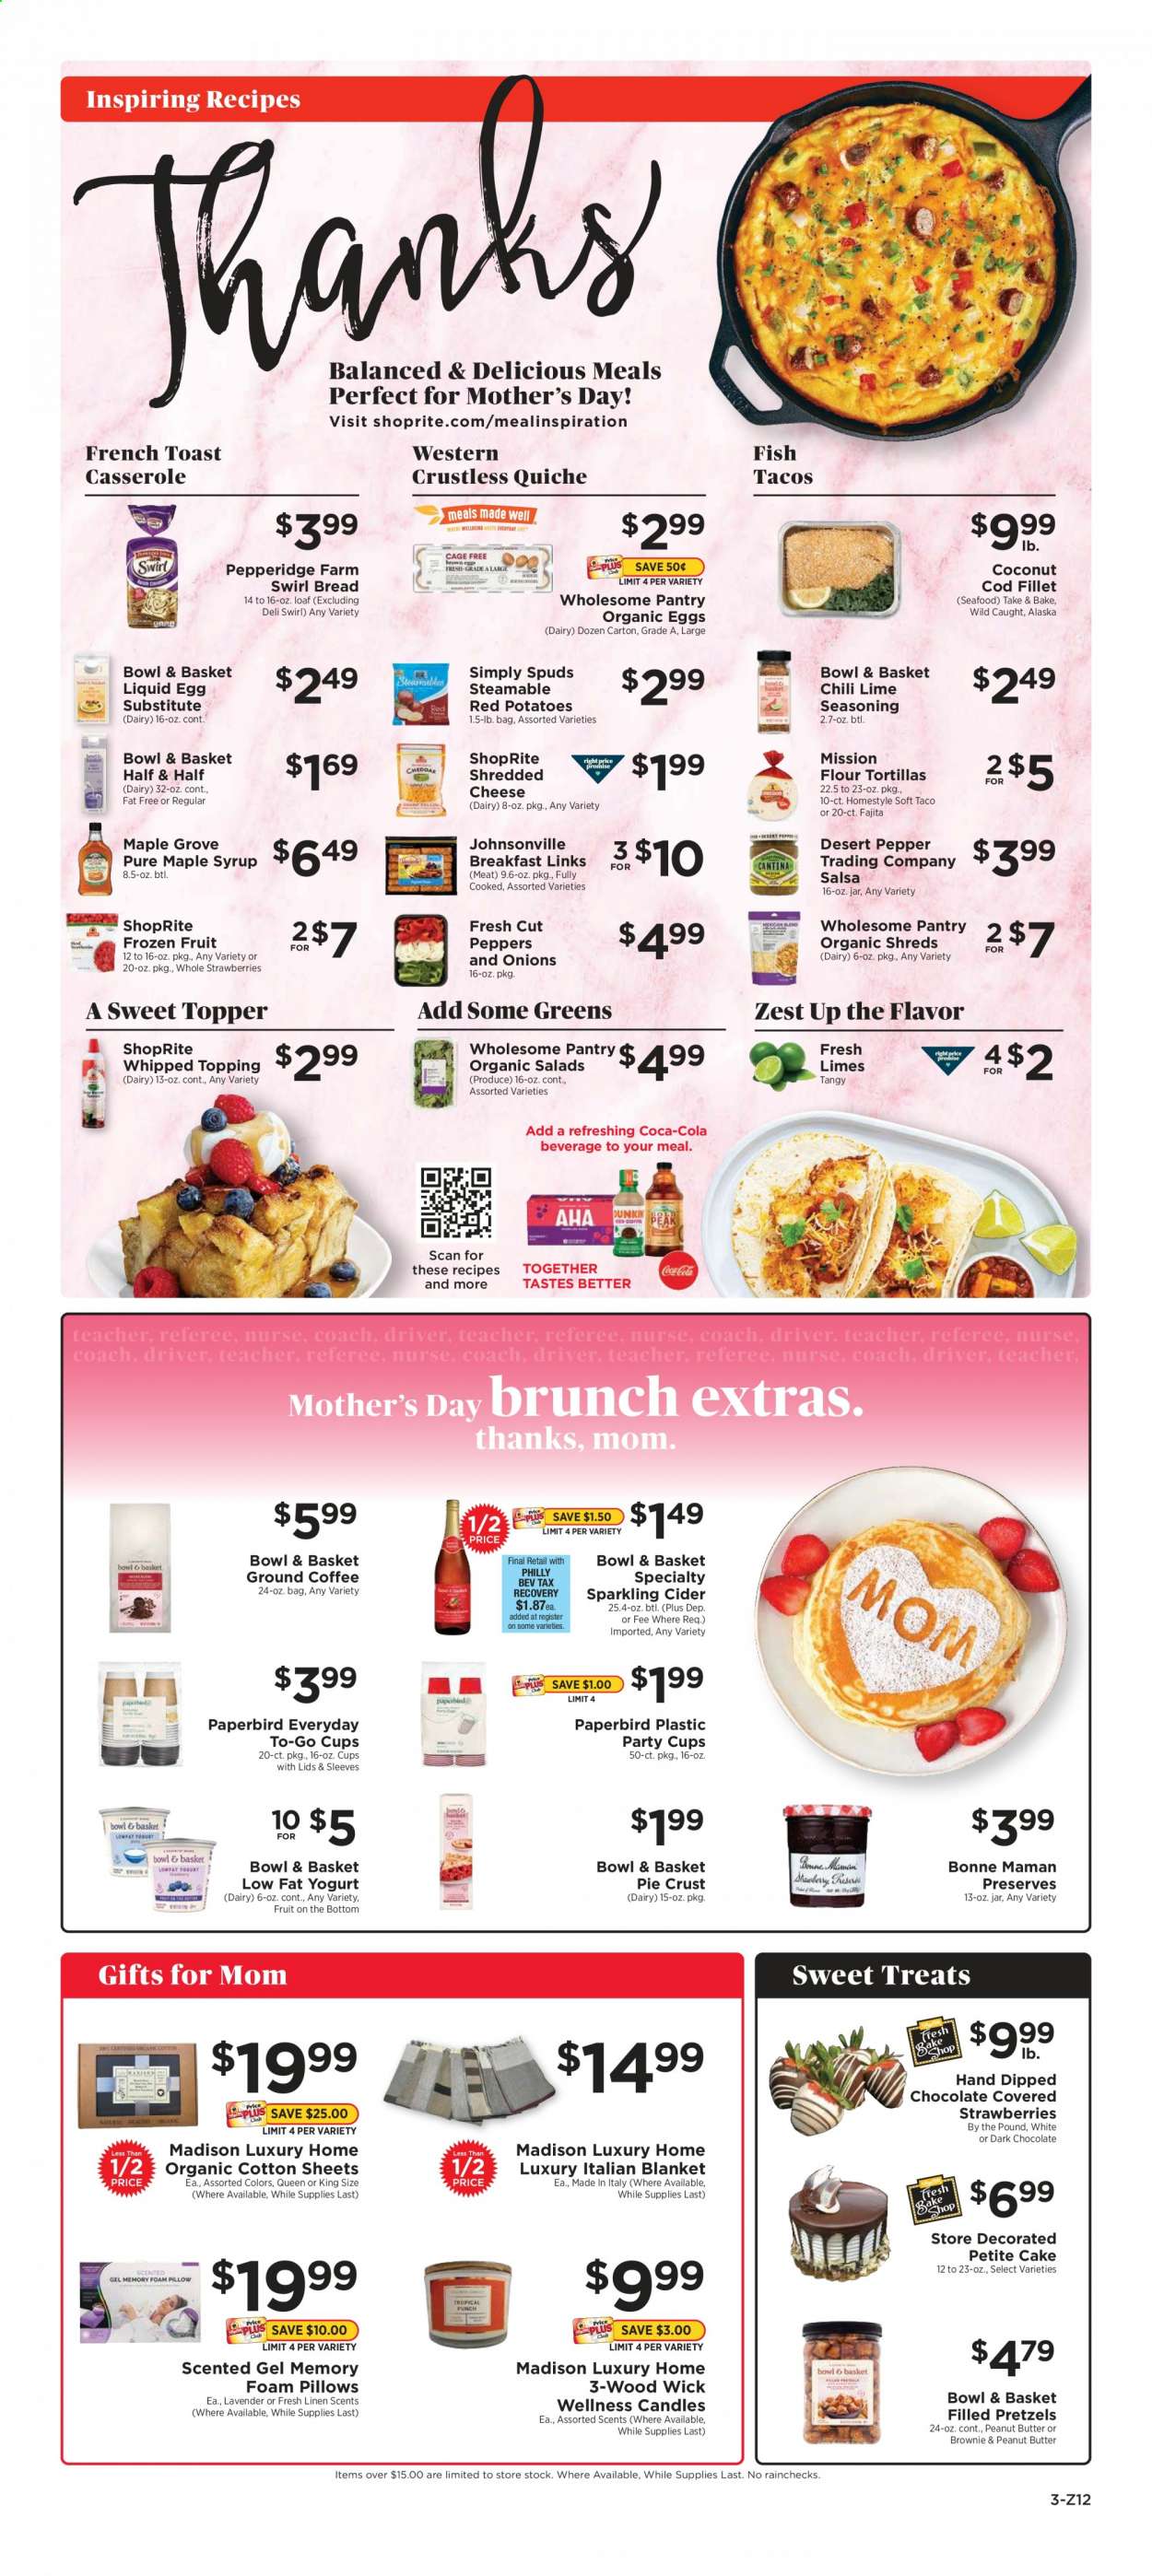 thumbnail - ShopRite Flyer - 05/02/2021 - 05/08/2021 - Sales products - bread, tortillas, pretzels, cake, tacos, Bowl & Basket, flour tortillas, brownies, potatoes, salad, red potatoes, limes, strawberries, coconut, cod, seafood, fish, fajita, Johnsonville, shredded cheese, yoghurt, eggs, quiche, pie crust, topping, pepper, spice, salsa, maple syrup, peanut butter, syrup, Coca-Cola, sparkling cider, sparkling wine, cider, casserole, party cups, cup, bowl, candle, blanket, Half and half. Page 3.